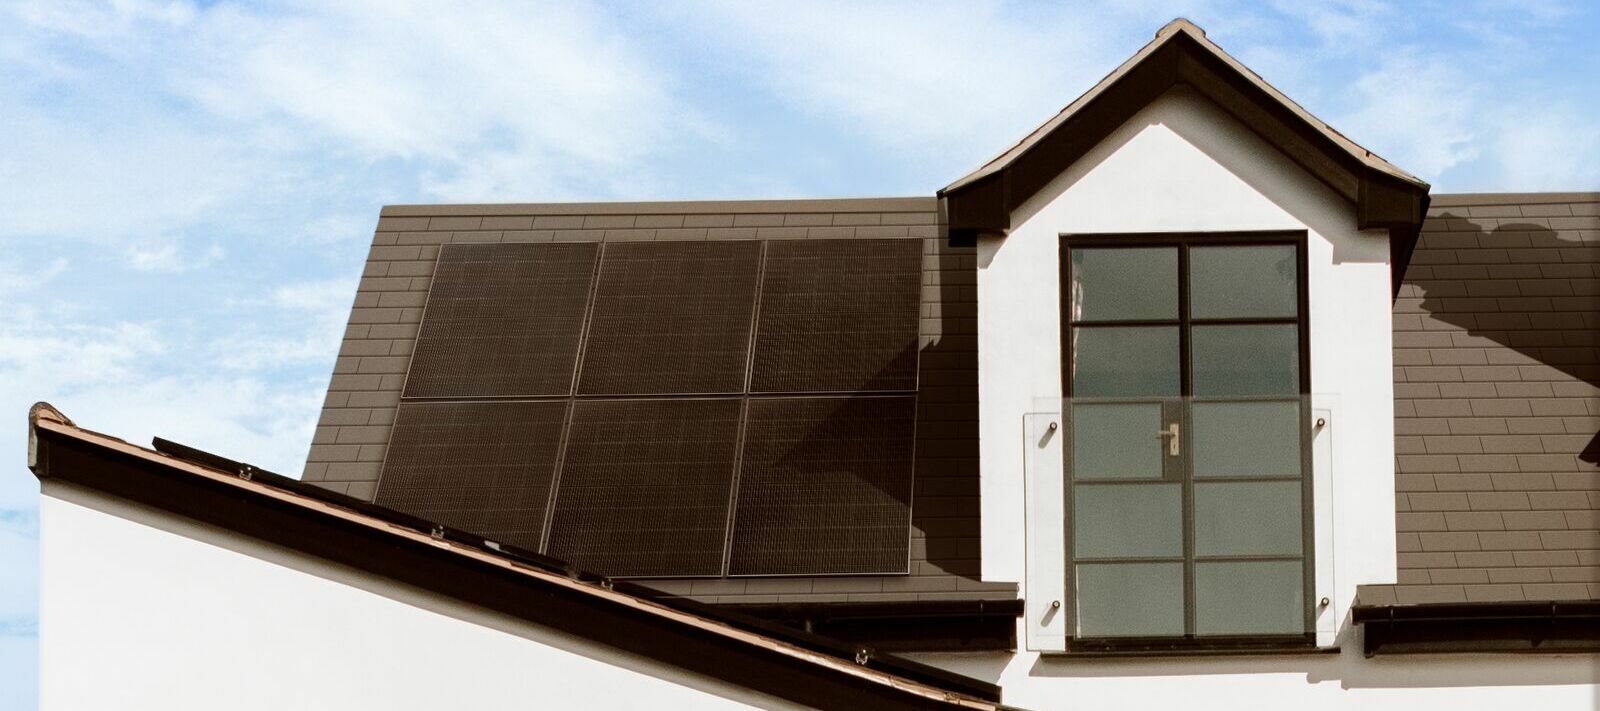 Solar installed by OVO? We’d love to hear from you